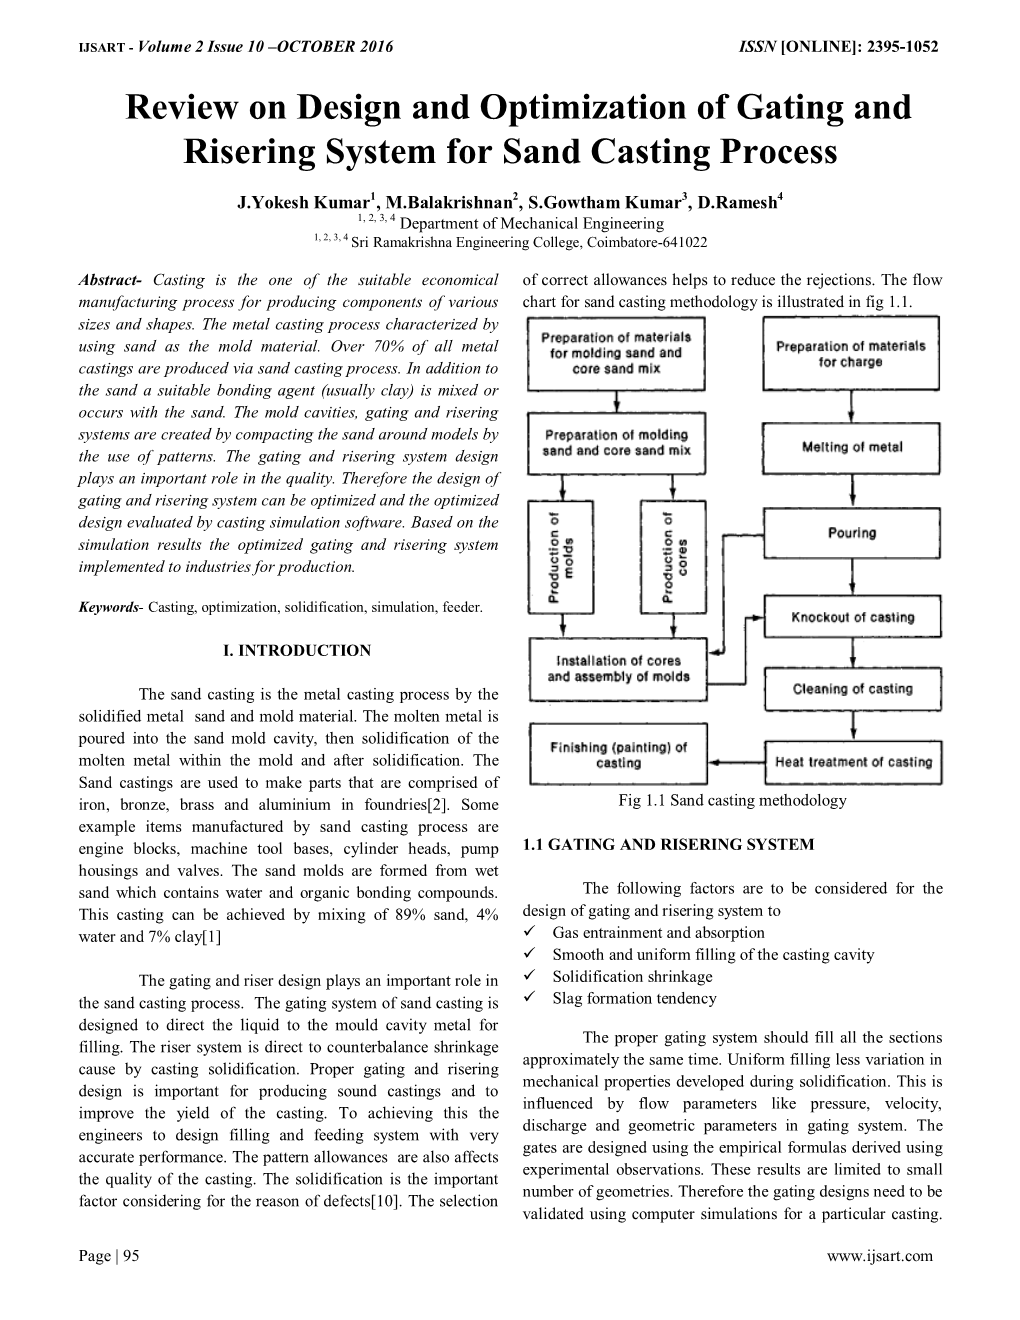 Review on Design and Optimization of Gating and Risering System for Sand Casting Process